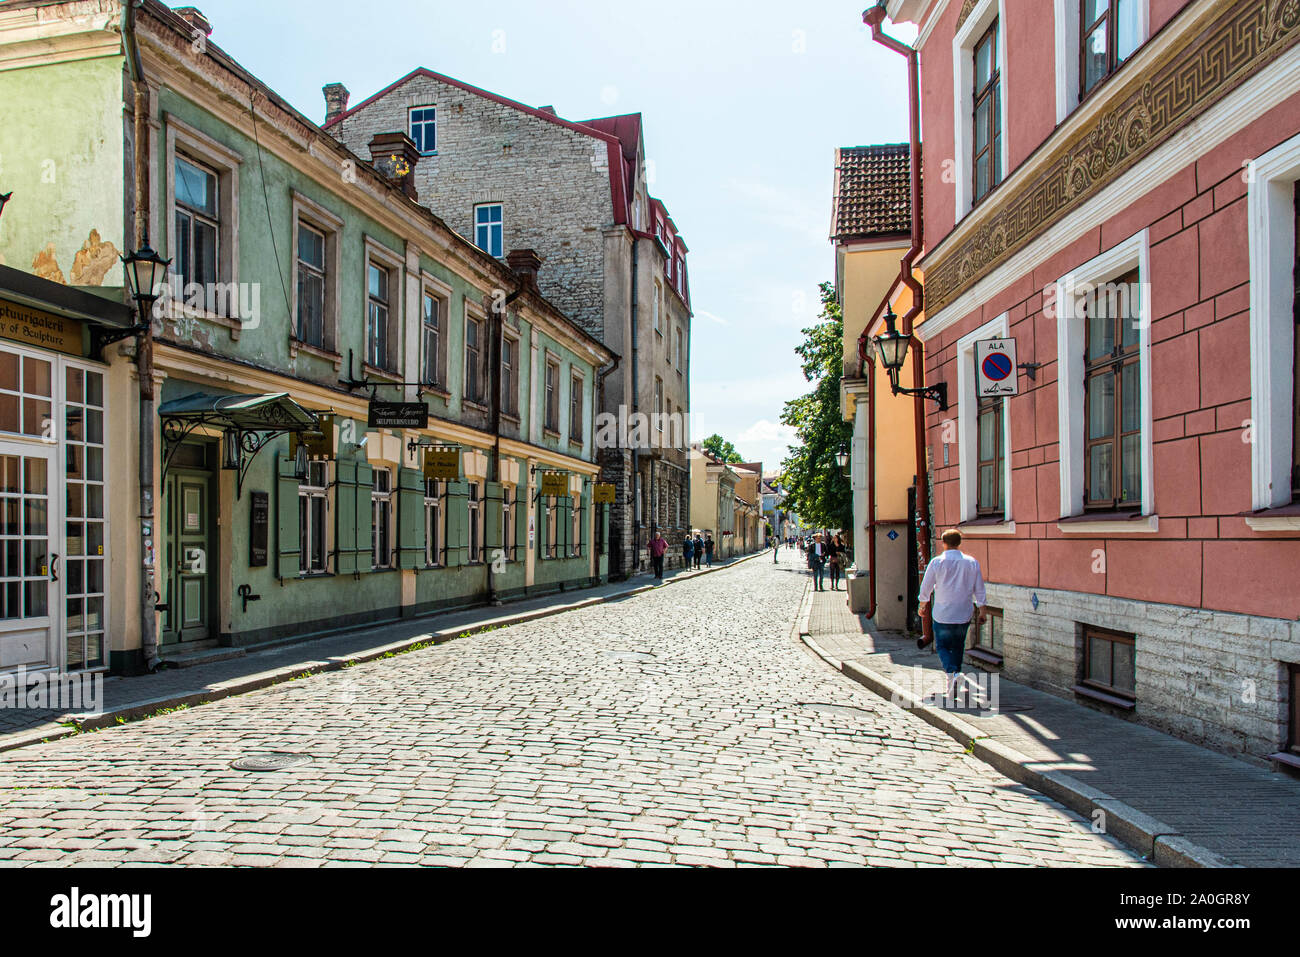 Historic streets and building in Old Town, Tallinn, Estonia. Stock Photo